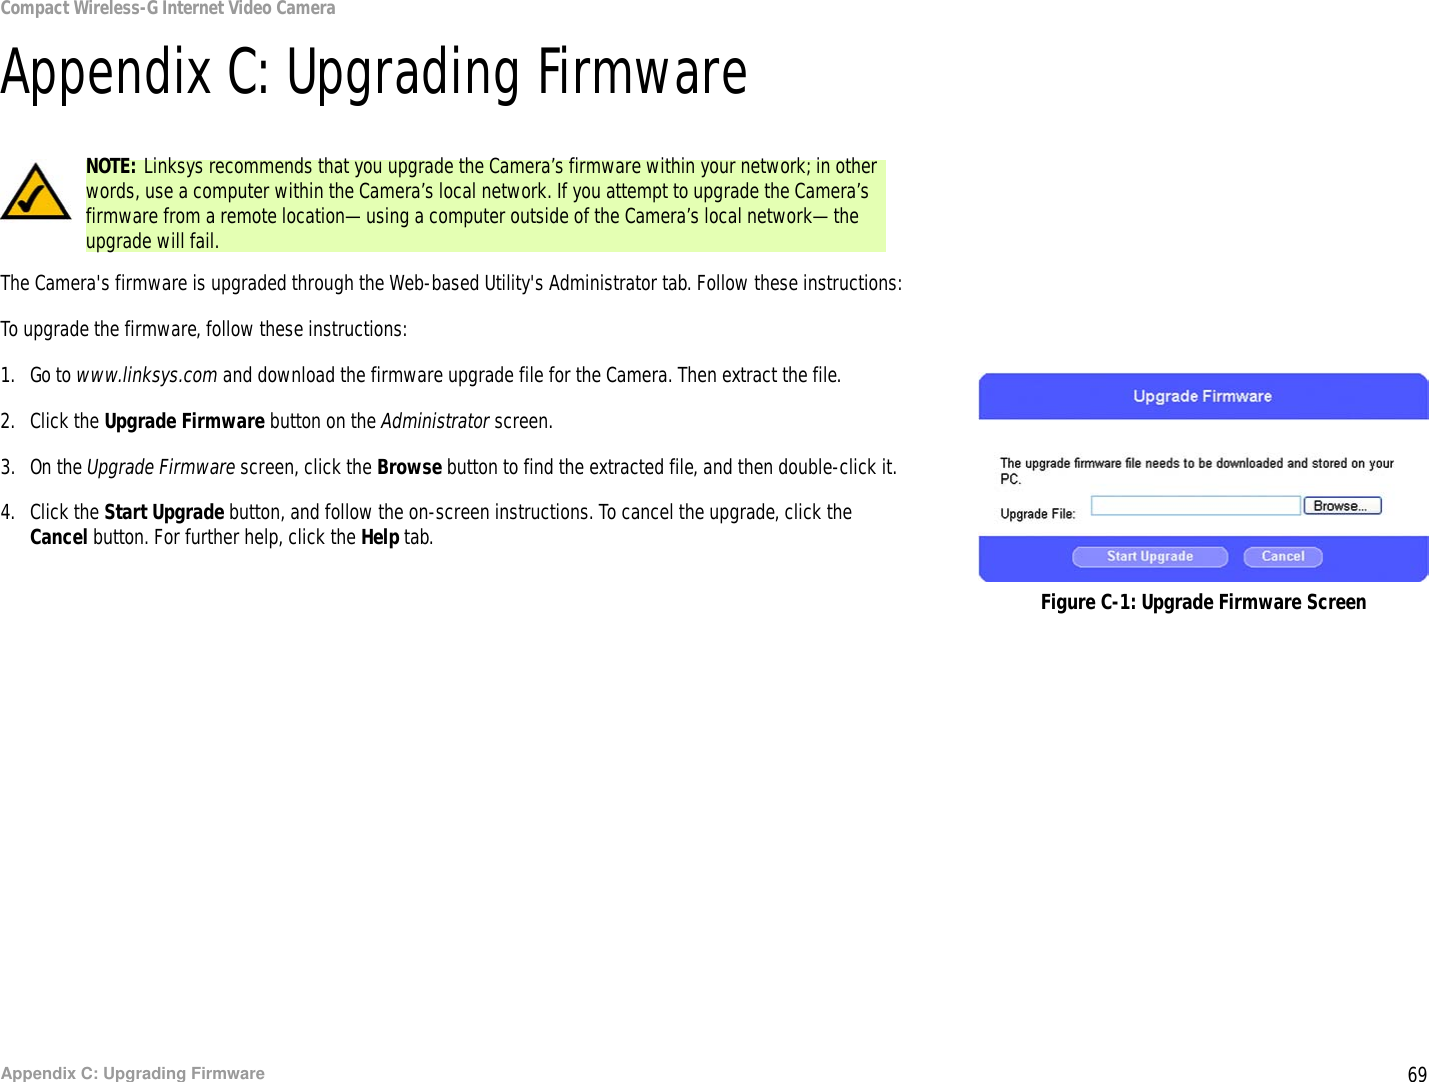 69Appendix C: Upgrading FirmwareCompact Wireless-G Internet Video CameraAppendix C: Upgrading FirmwareThe Camera&apos;s firmware is upgraded through the Web-based Utility&apos;s Administrator tab. Follow these instructions:To upgrade the firmware, follow these instructions:1. Go to www.linksys.com and download the firmware upgrade file for the Camera. Then extract the file. 2. Click the Upgrade Firmware button on the Administrator screen.3. On the Upgrade Firmware screen, click the Browse button to find the extracted file, and then double-click it.4. Click the Start Upgrade button, and follow the on-screen instructions. To cancel the upgrade, click the Cancel button. For further help, click the Help tab.Figure C-1: Upgrade Firmware ScreenNOTE: Linksys recommends that you upgrade the Camera’s firmware within your network; in other words, use a computer within the Camera’s local network. If you attempt to upgrade the Camera’s firmware from a remote location—using a computer outside of the Camera’s local network—the upgrade will fail.